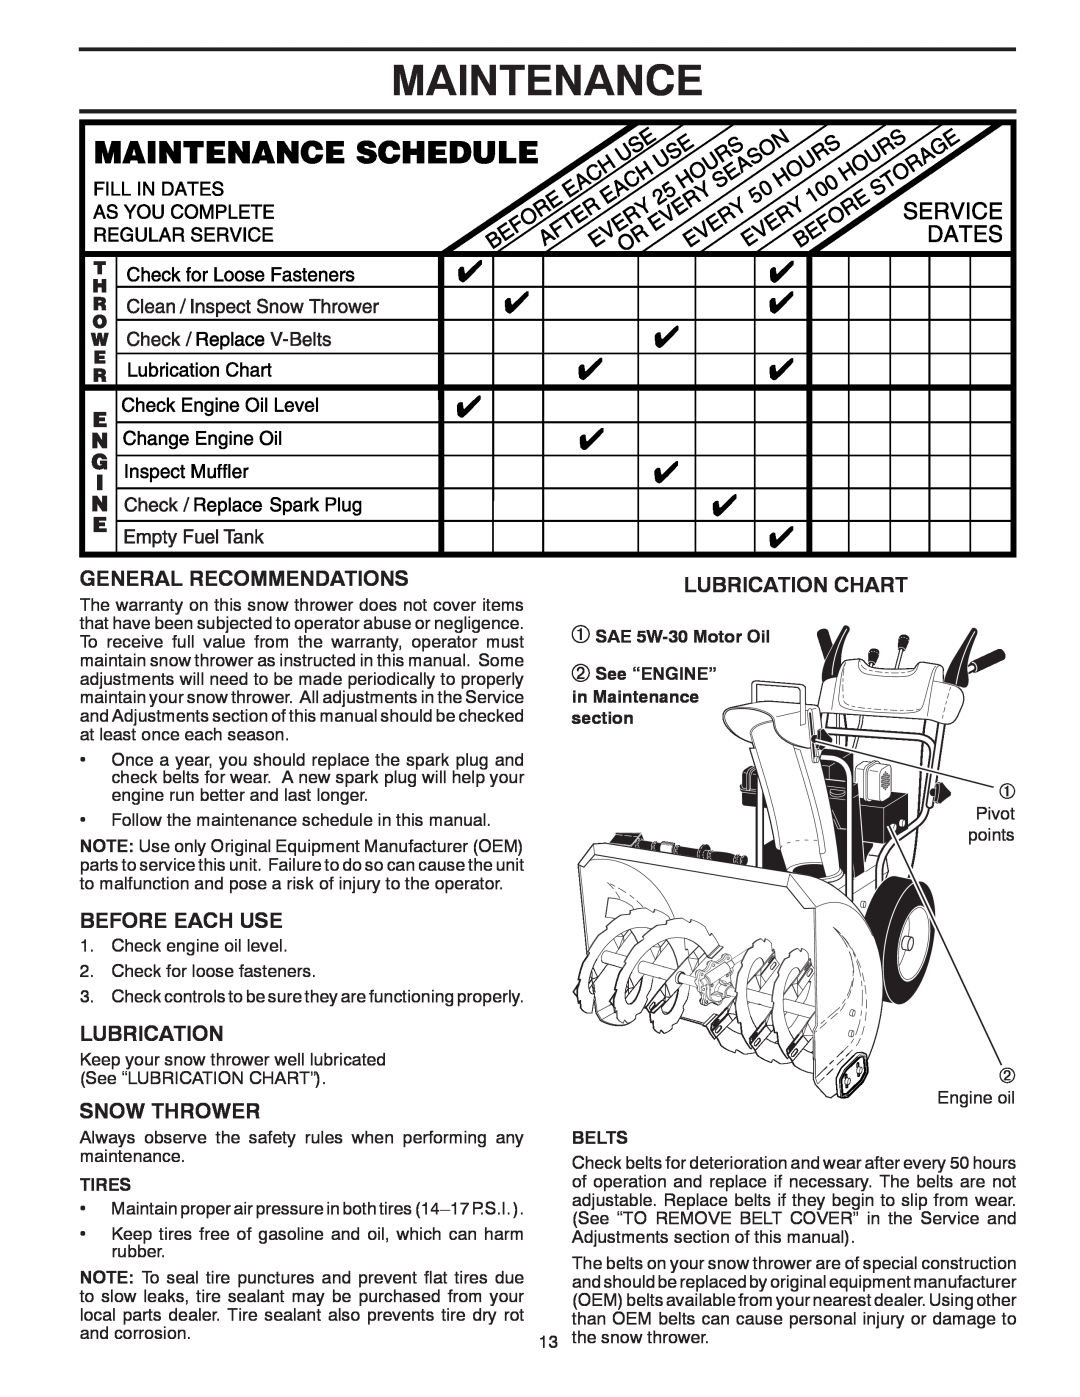 Poulan P14530ES owner manual Tires, SAE 5W-30Motor Oil, See “ENGINE” in Maintenance section, Belts 